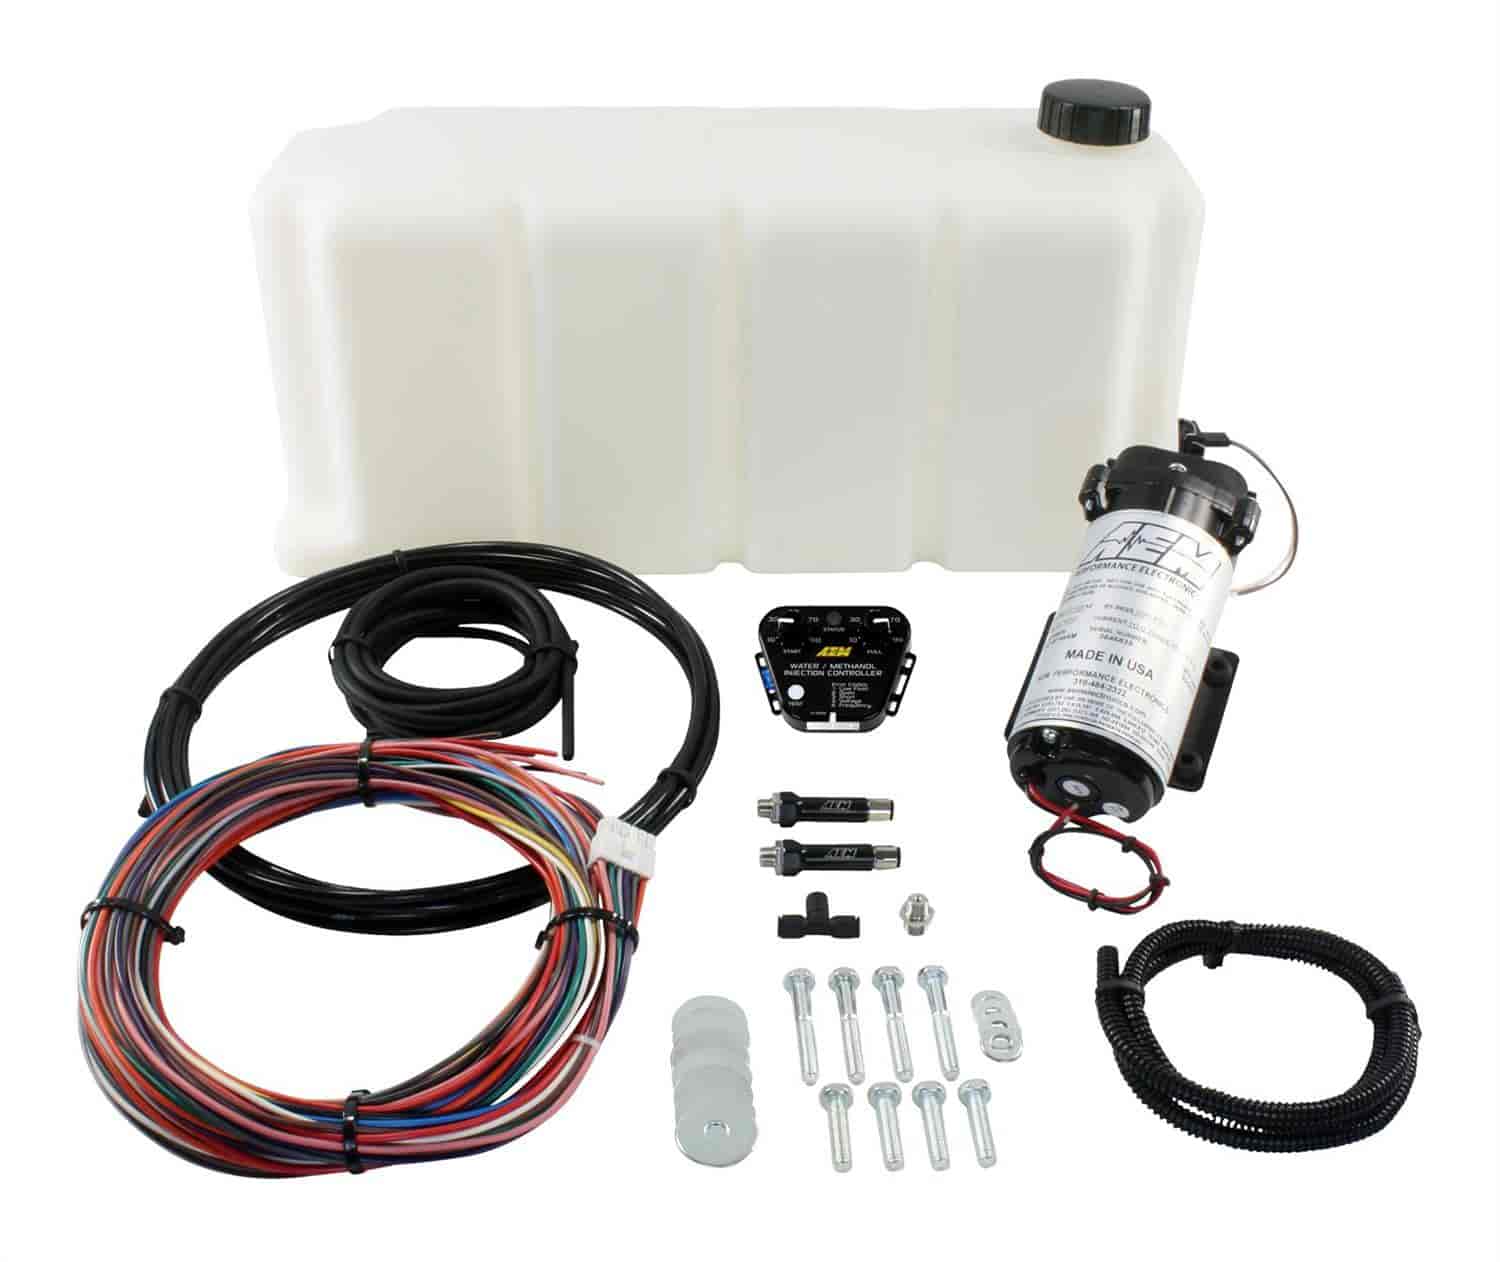 V2 Water/Methanol Injection Kit Includes: Multi Input Controller For Over 40psi